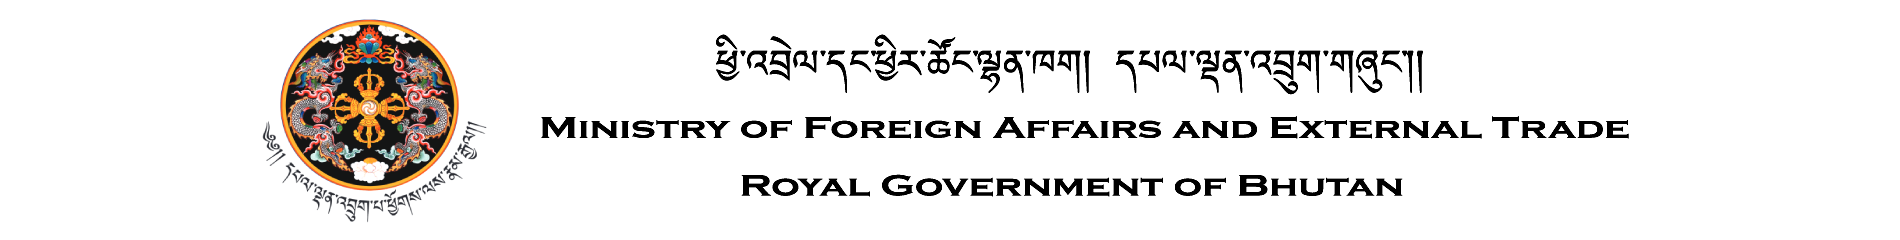 Ministry of Foreign Affairs and External Trade